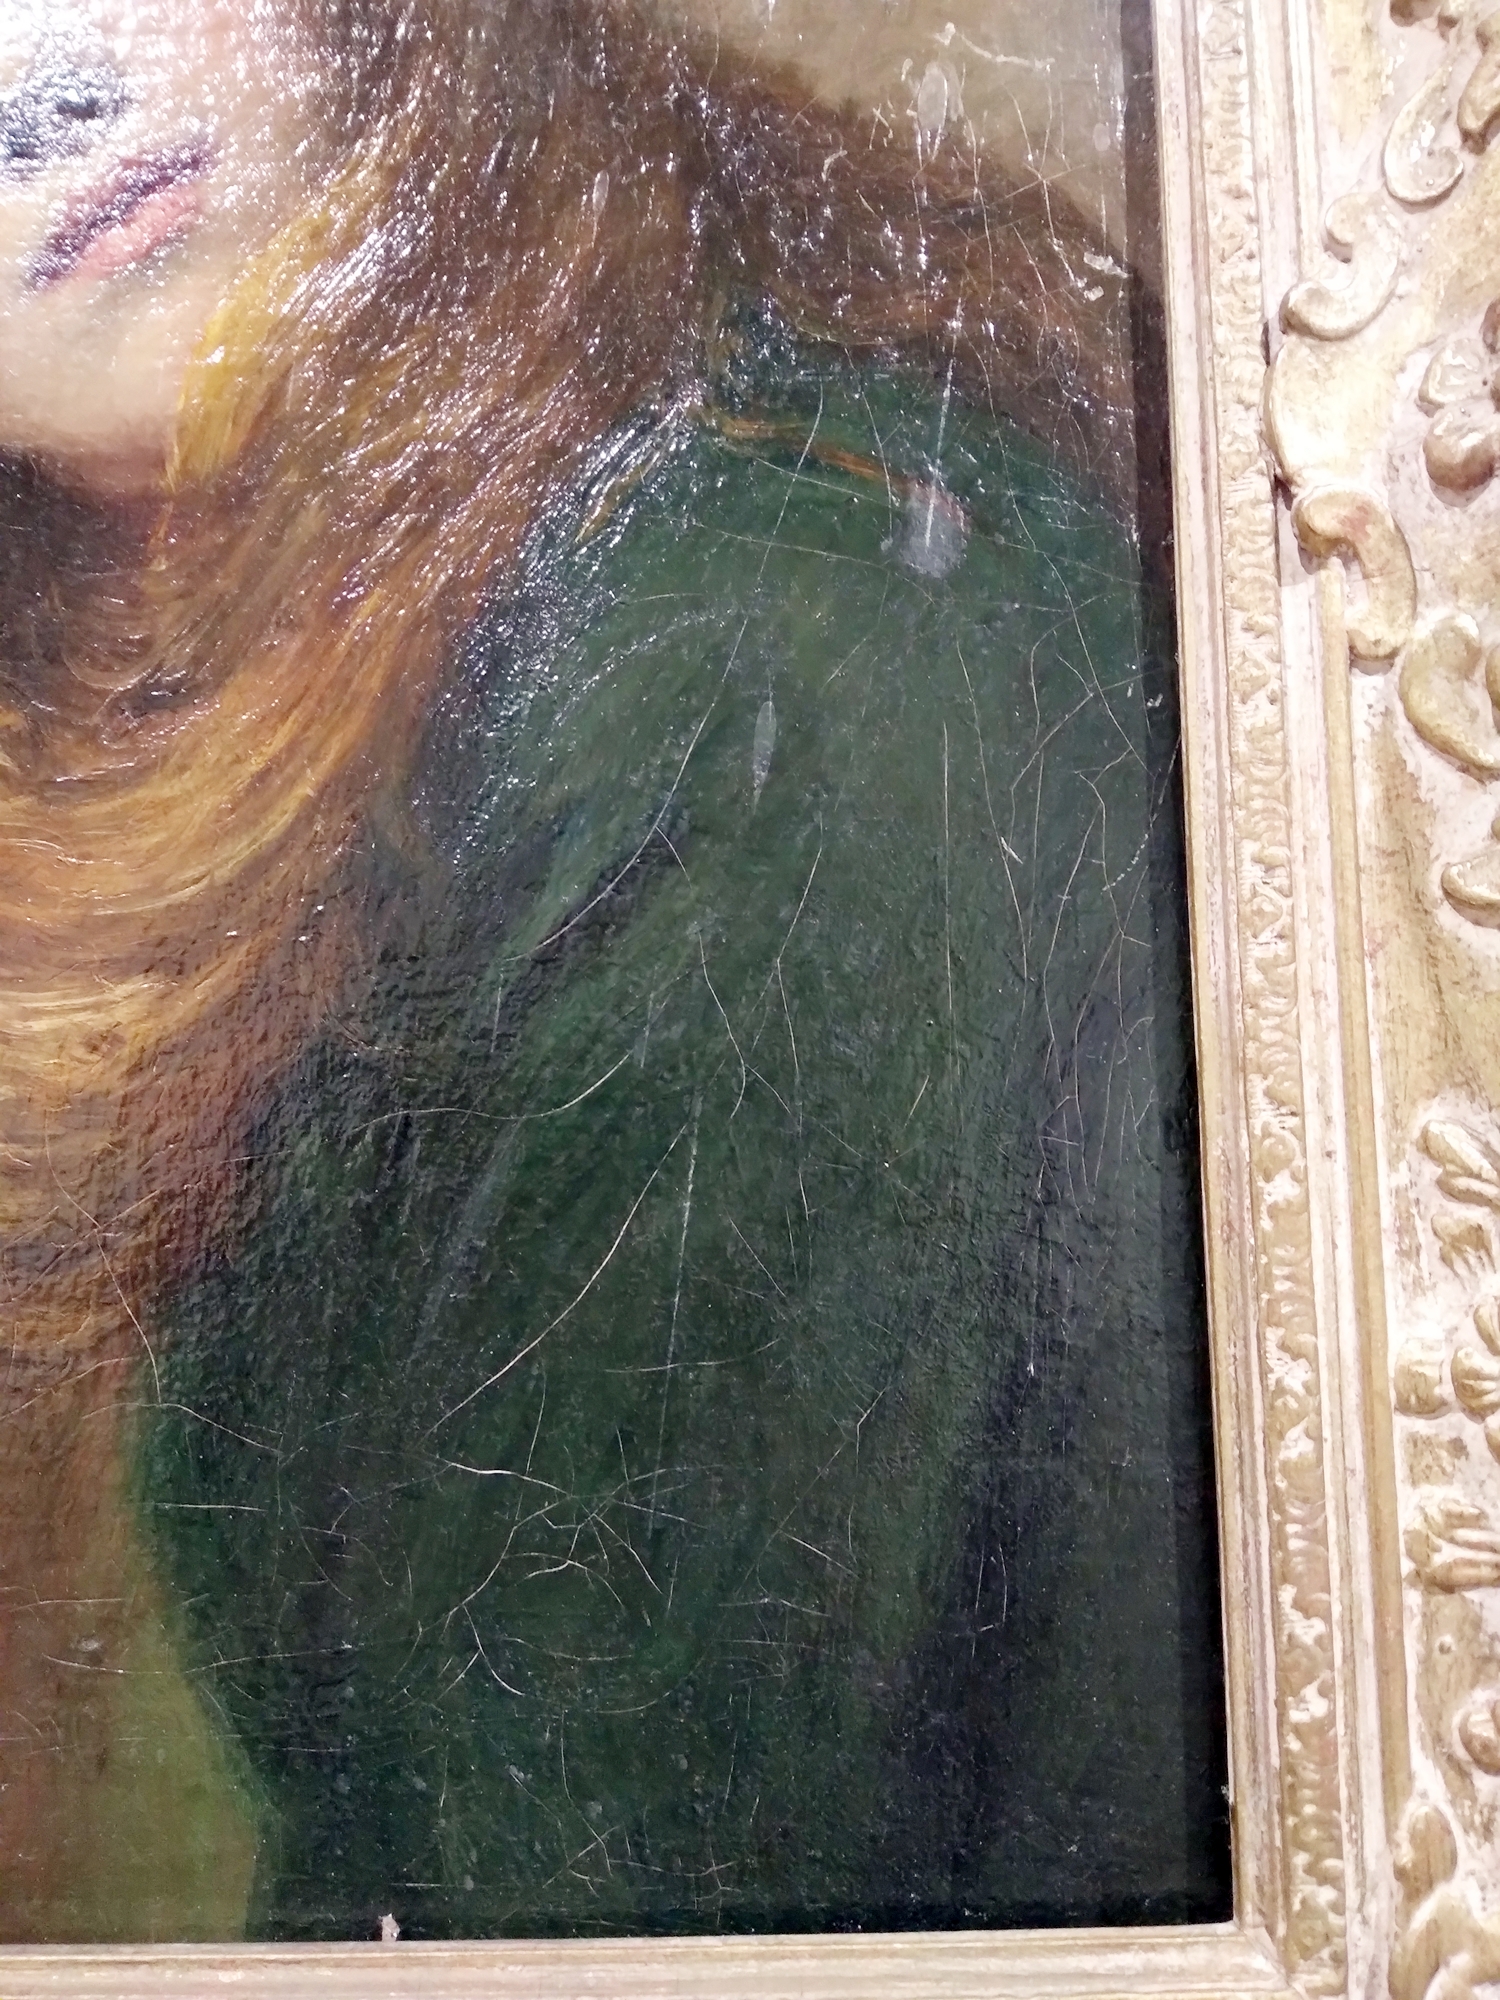 Late 19th century British School Oil on canvas Portrait of a young woman with windswept red hair - Image 5 of 24